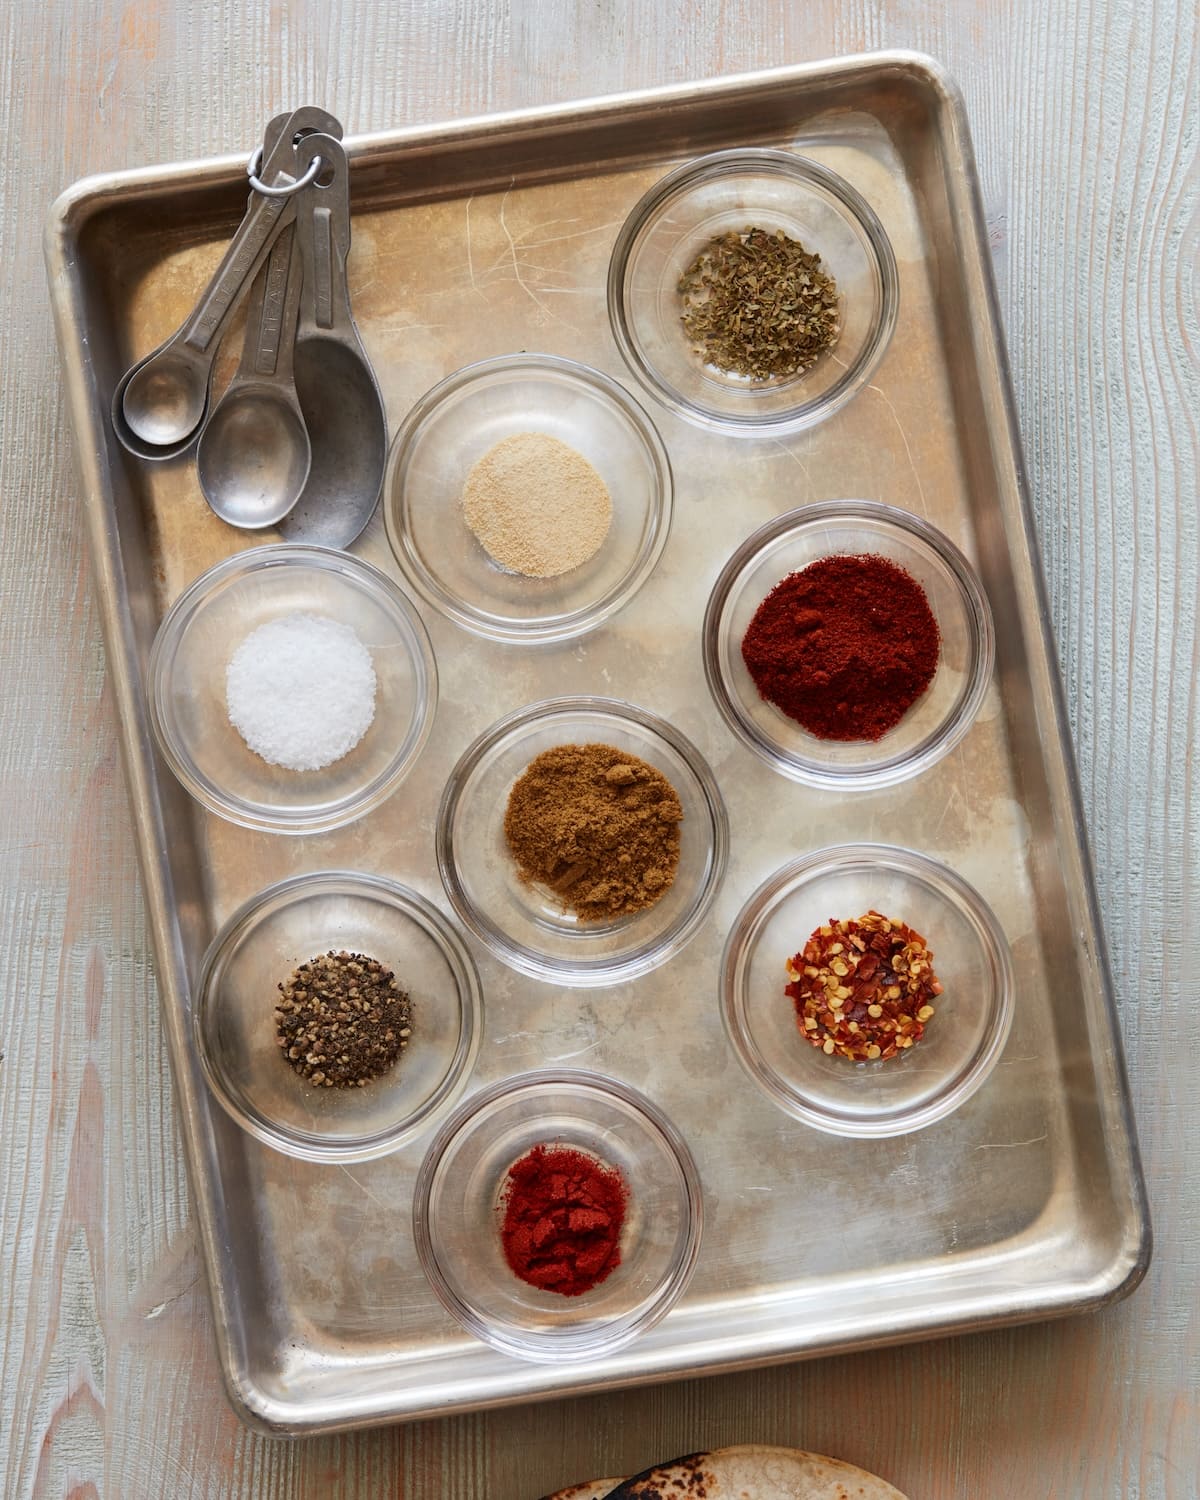 A sheet pan with 8 small glass mixing bowls, each with a different spice and a set of measuring spoons, ready to make homemade taco seasoning.